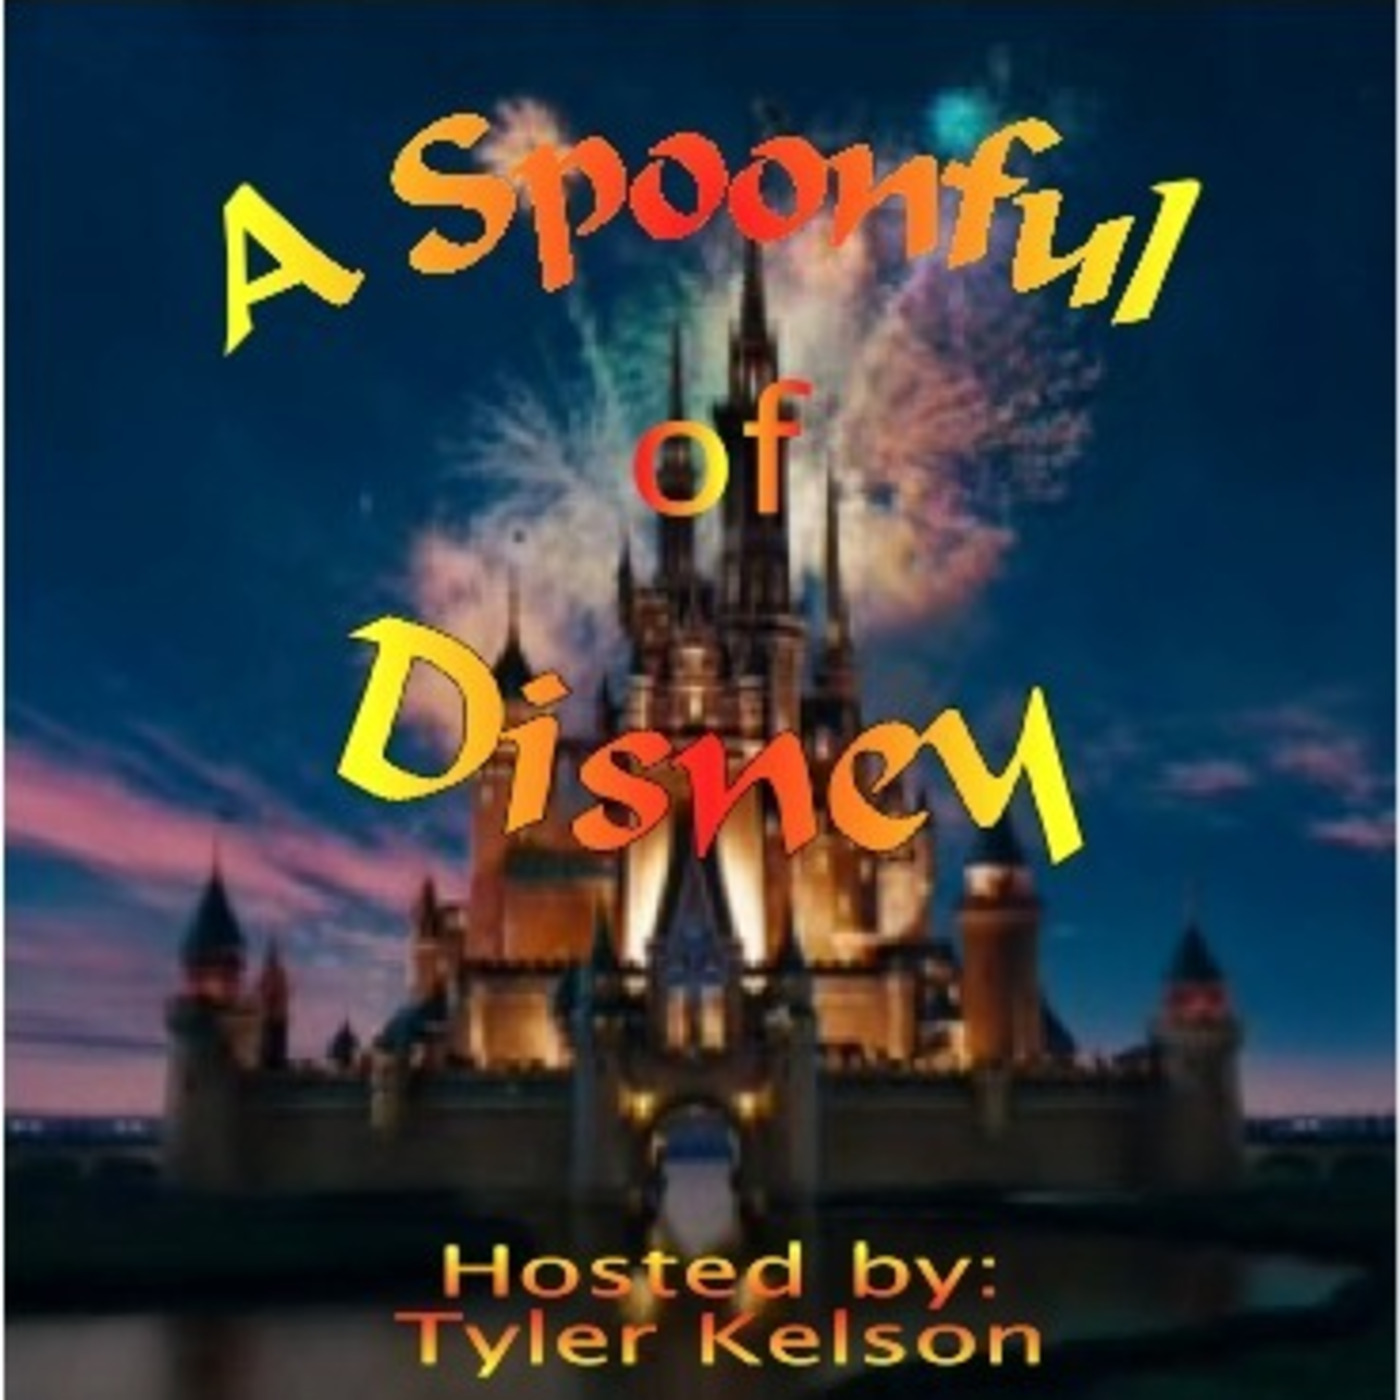 A Spoonful of Disney